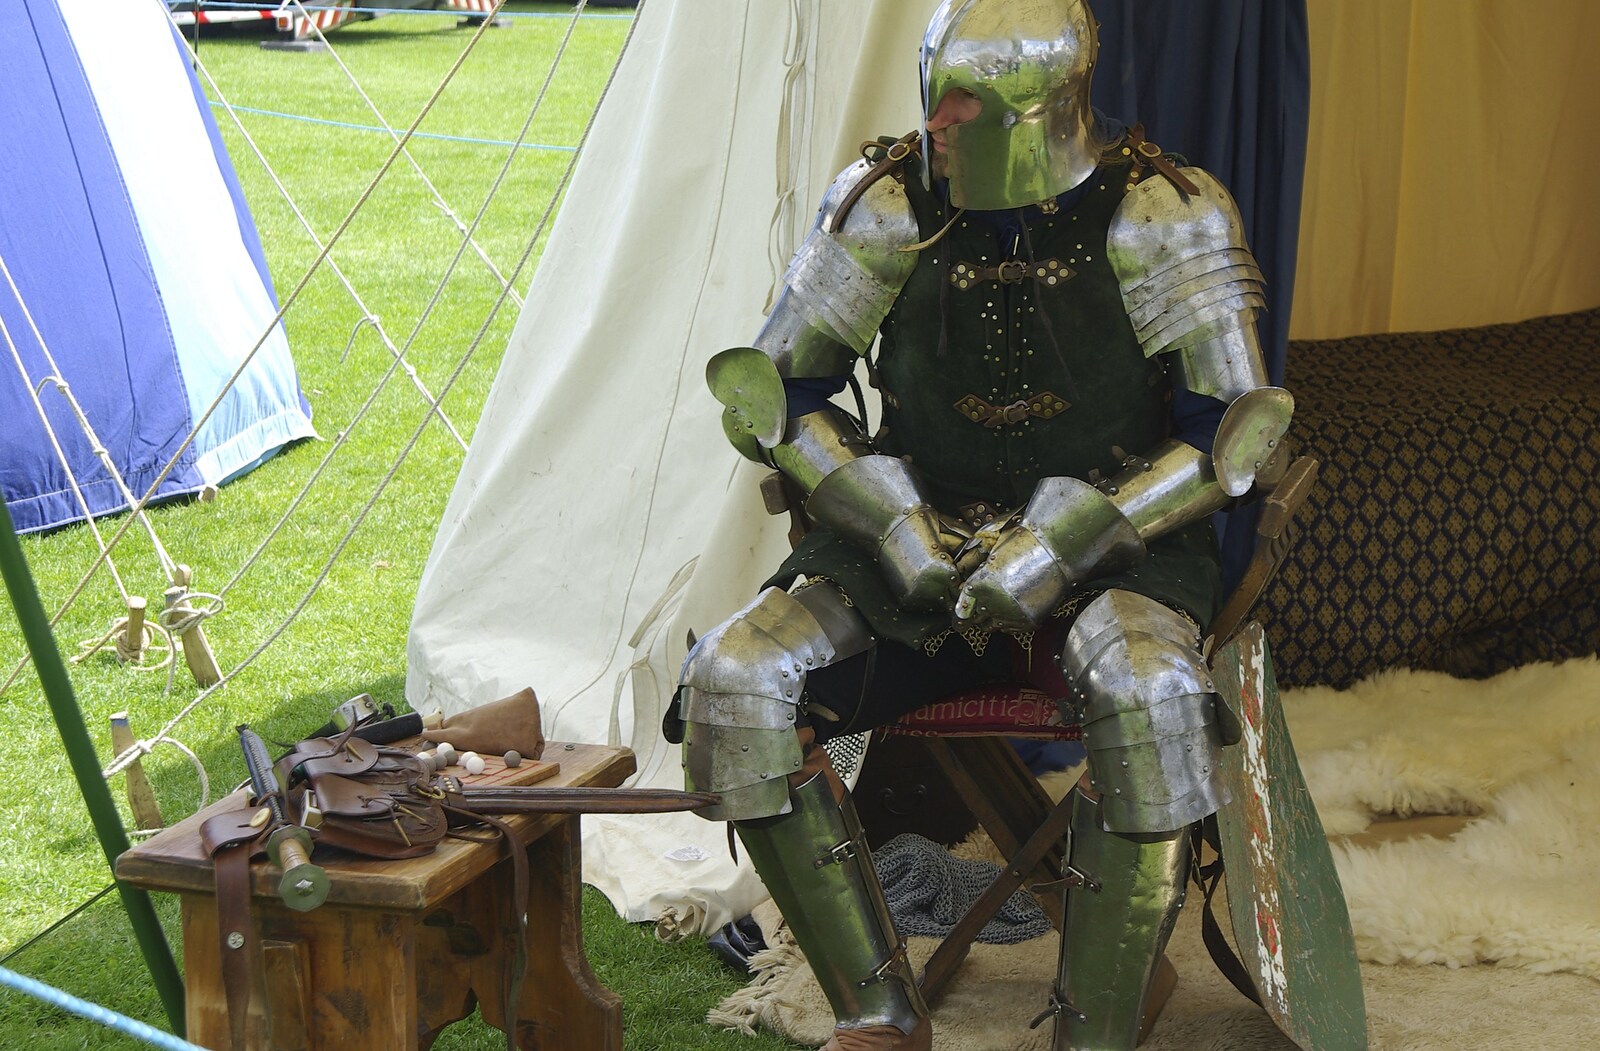 A New Bedroom, and The Cambridge County Show, Parker's Piece, Cambridge and Brome - 14th June 2008: A knight waits for action